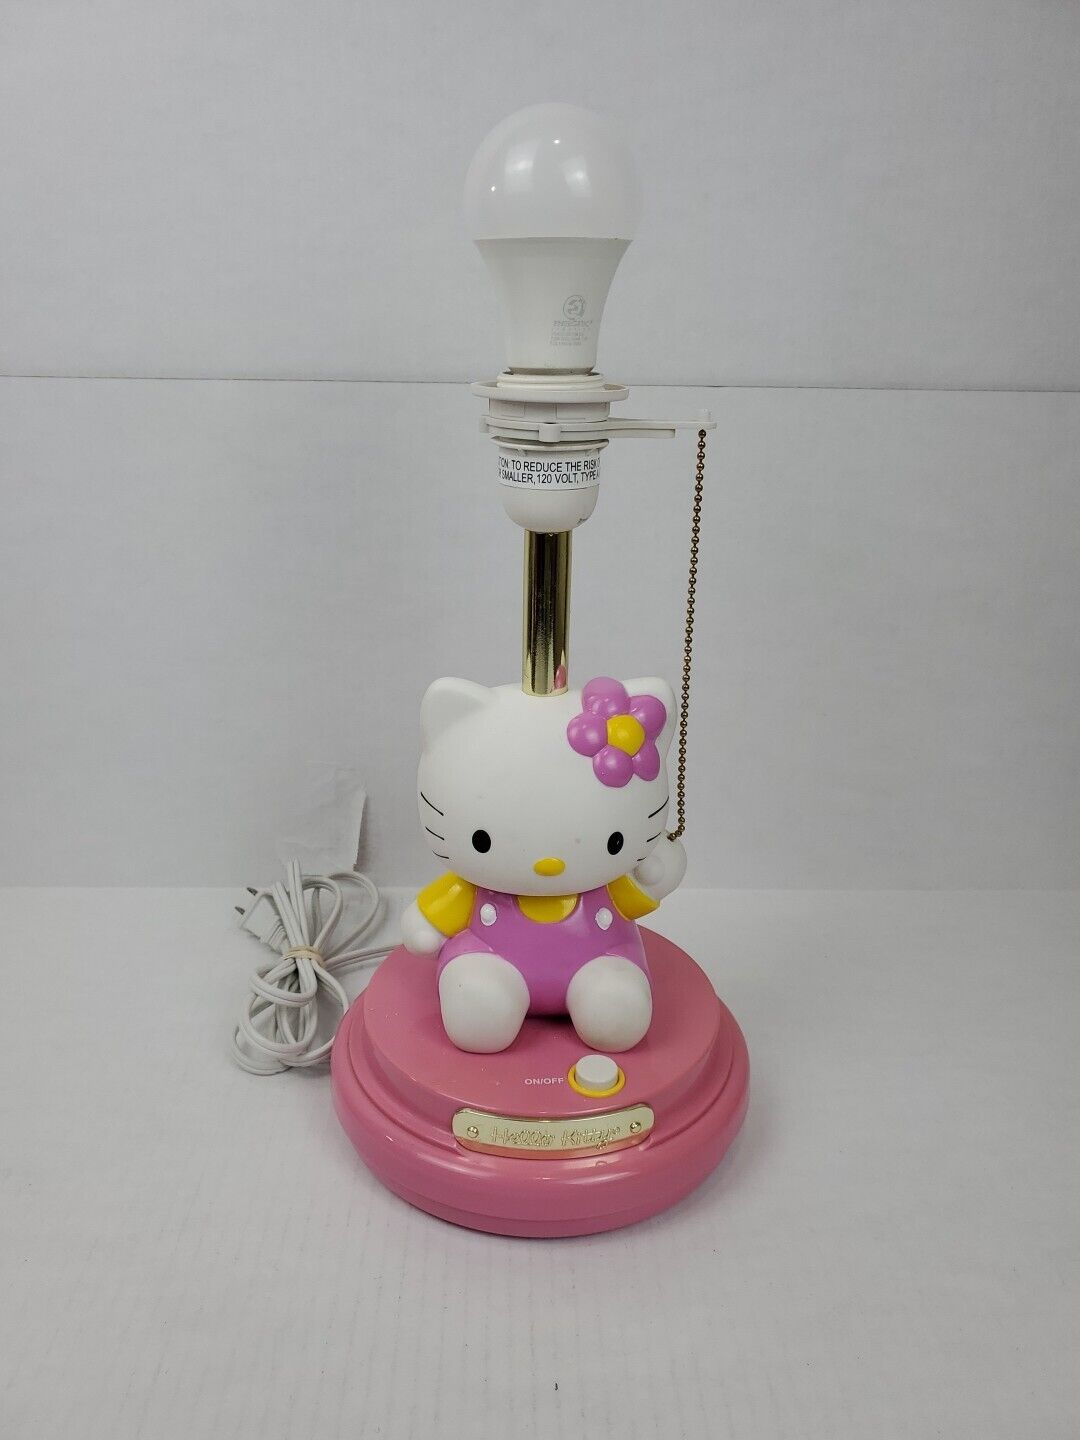 Sanrio HELLO KITTY Table Lamp Without Shade KT3095 1976 2009